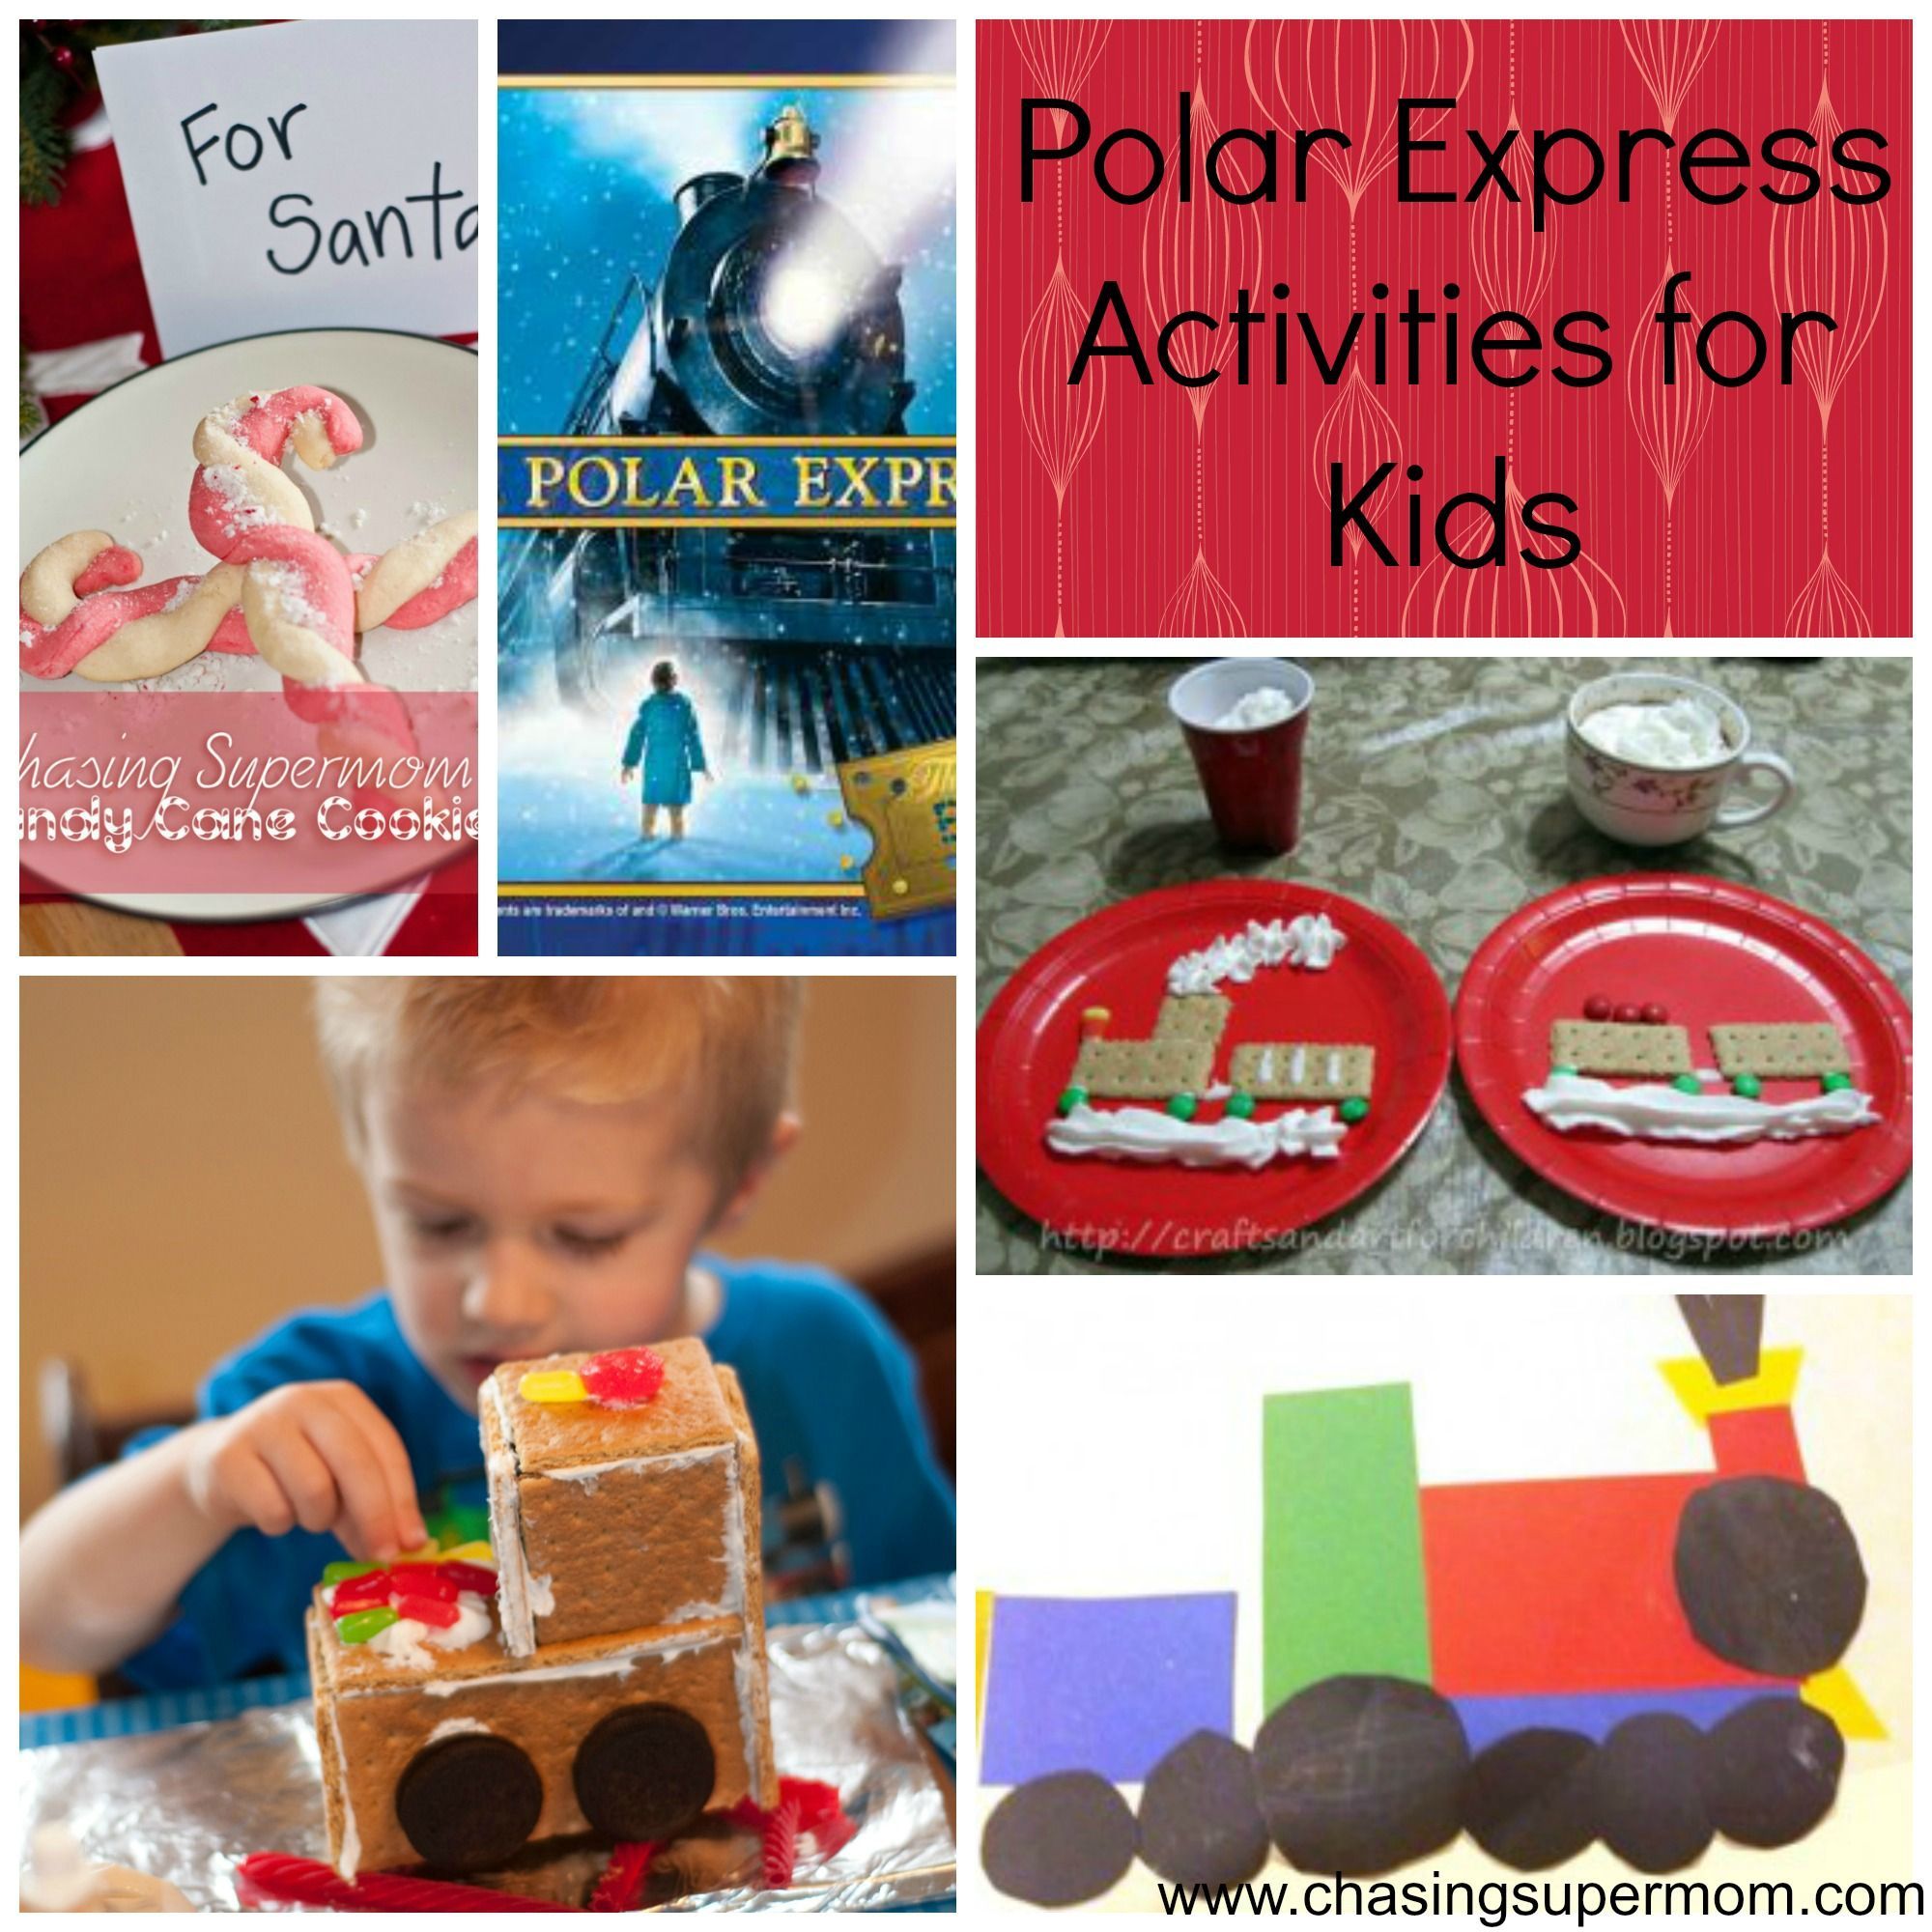 Polar Express Activities for Kids – Crafts, mini-books, printables, recipes, and more!